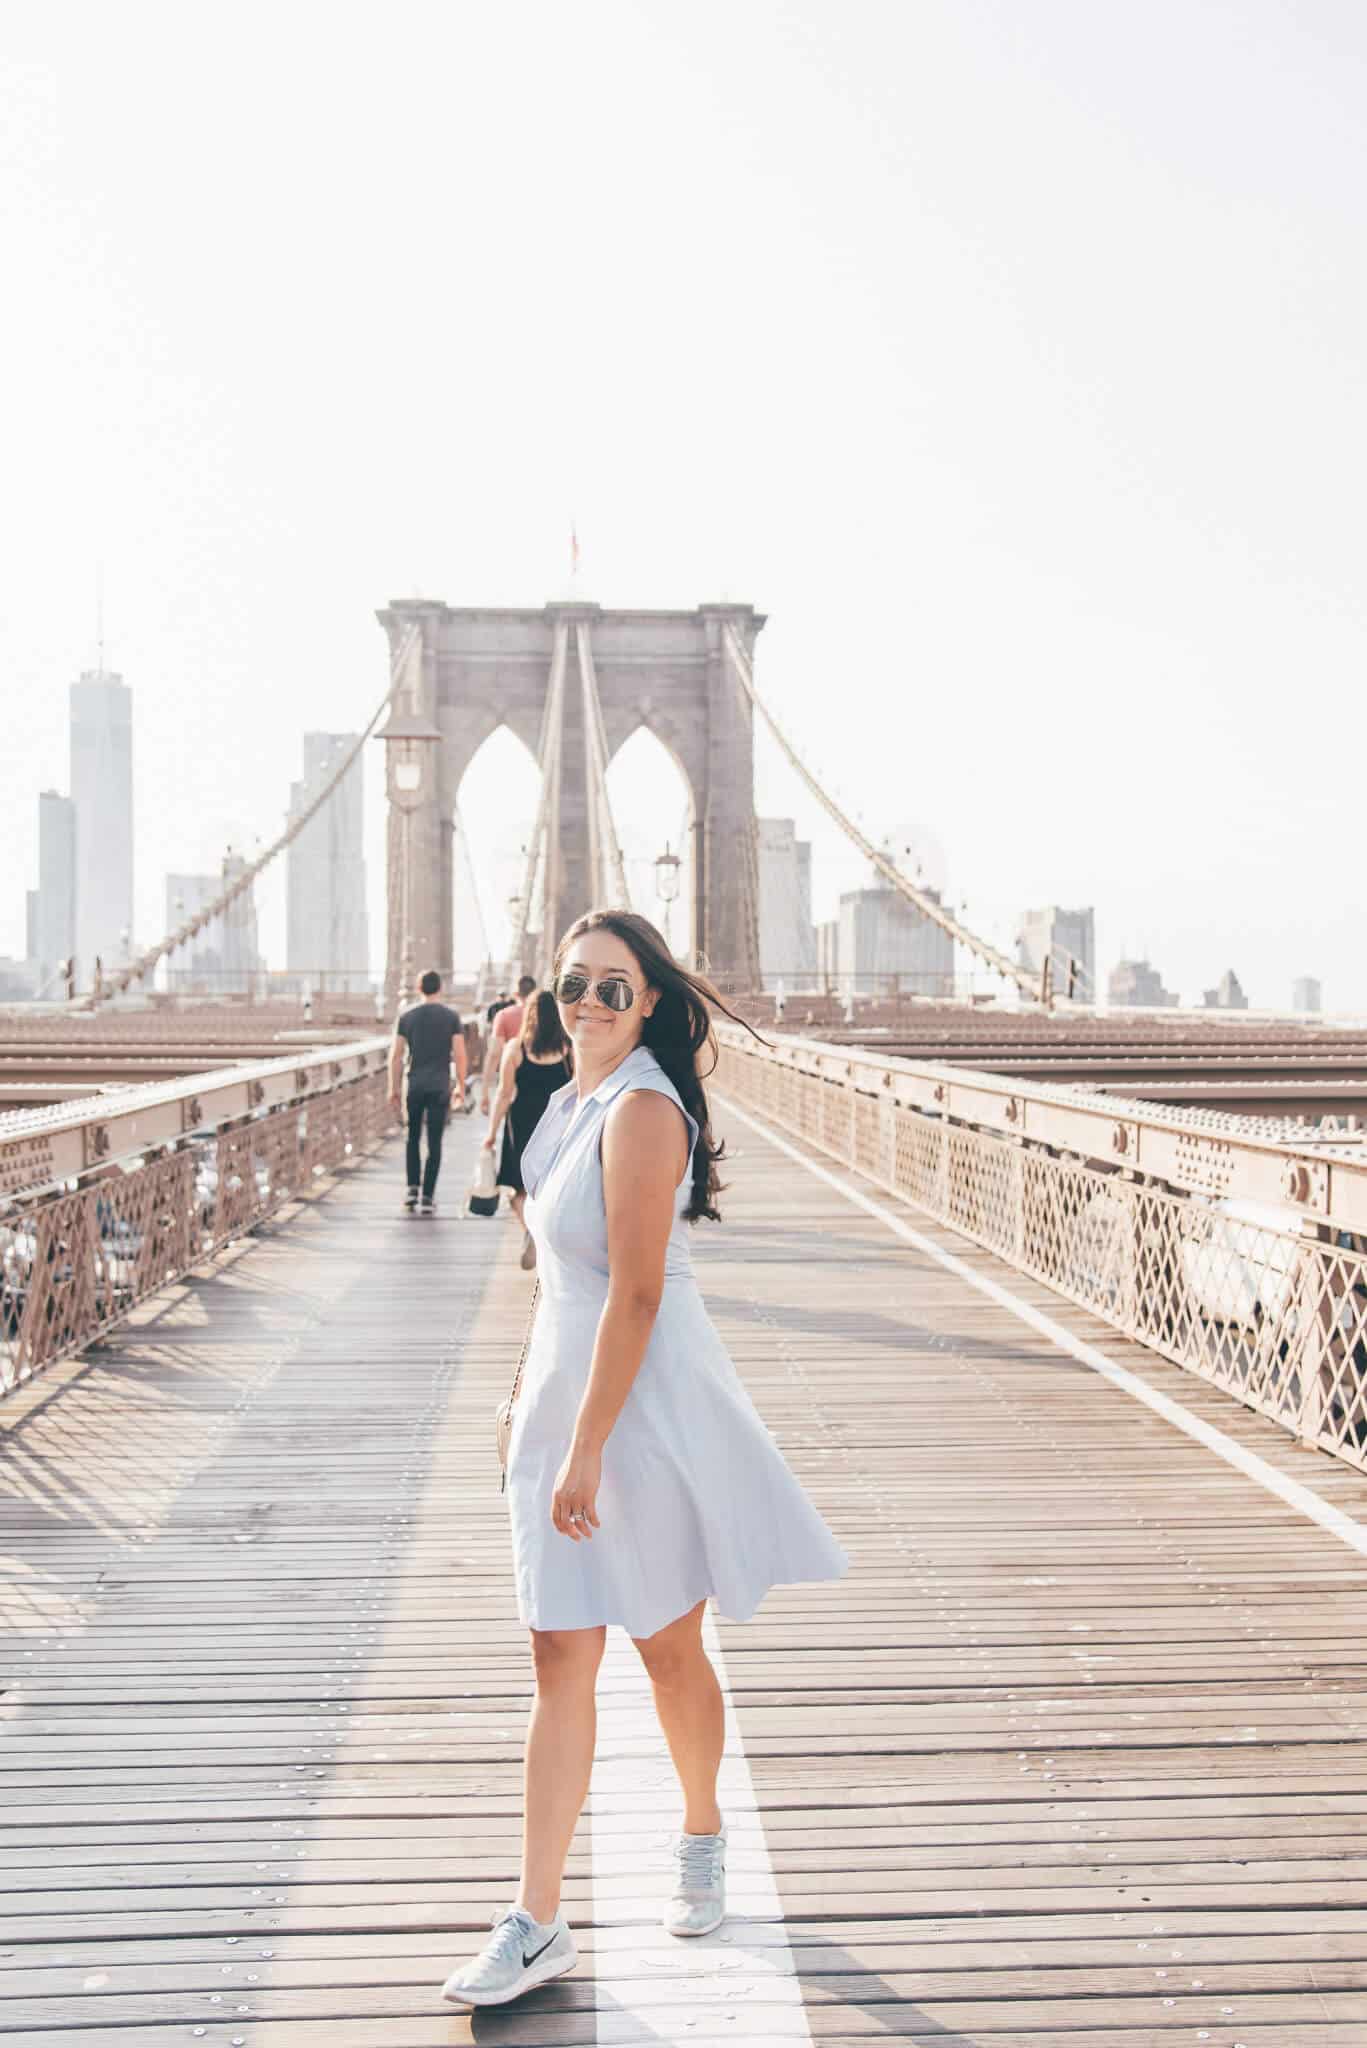 You feel like Brooklyn in the Summer - Casual Summer Outfit featured by popular San Francisco fashion blogger WTFab